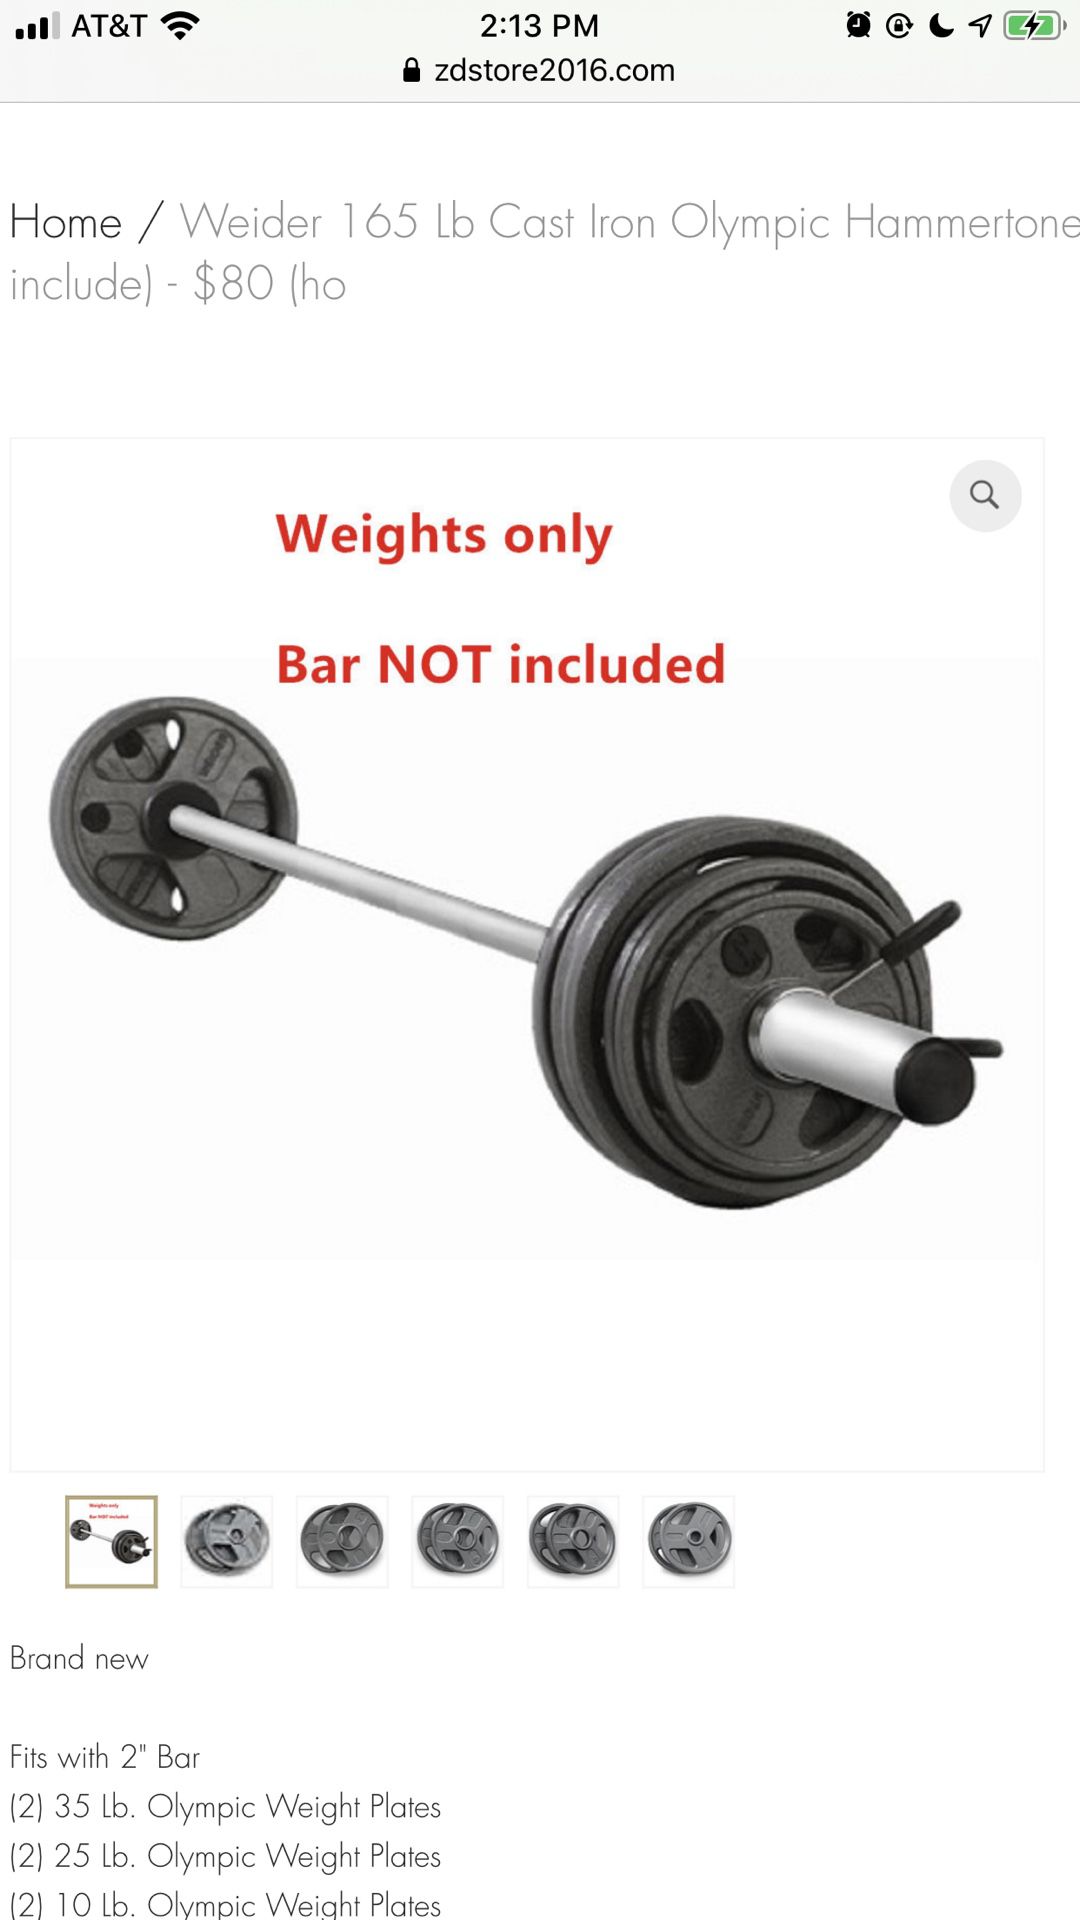 Weider 165 Lb Cast Iron Olympic Hammertone Weight Set (Bar no include) - $80 (h